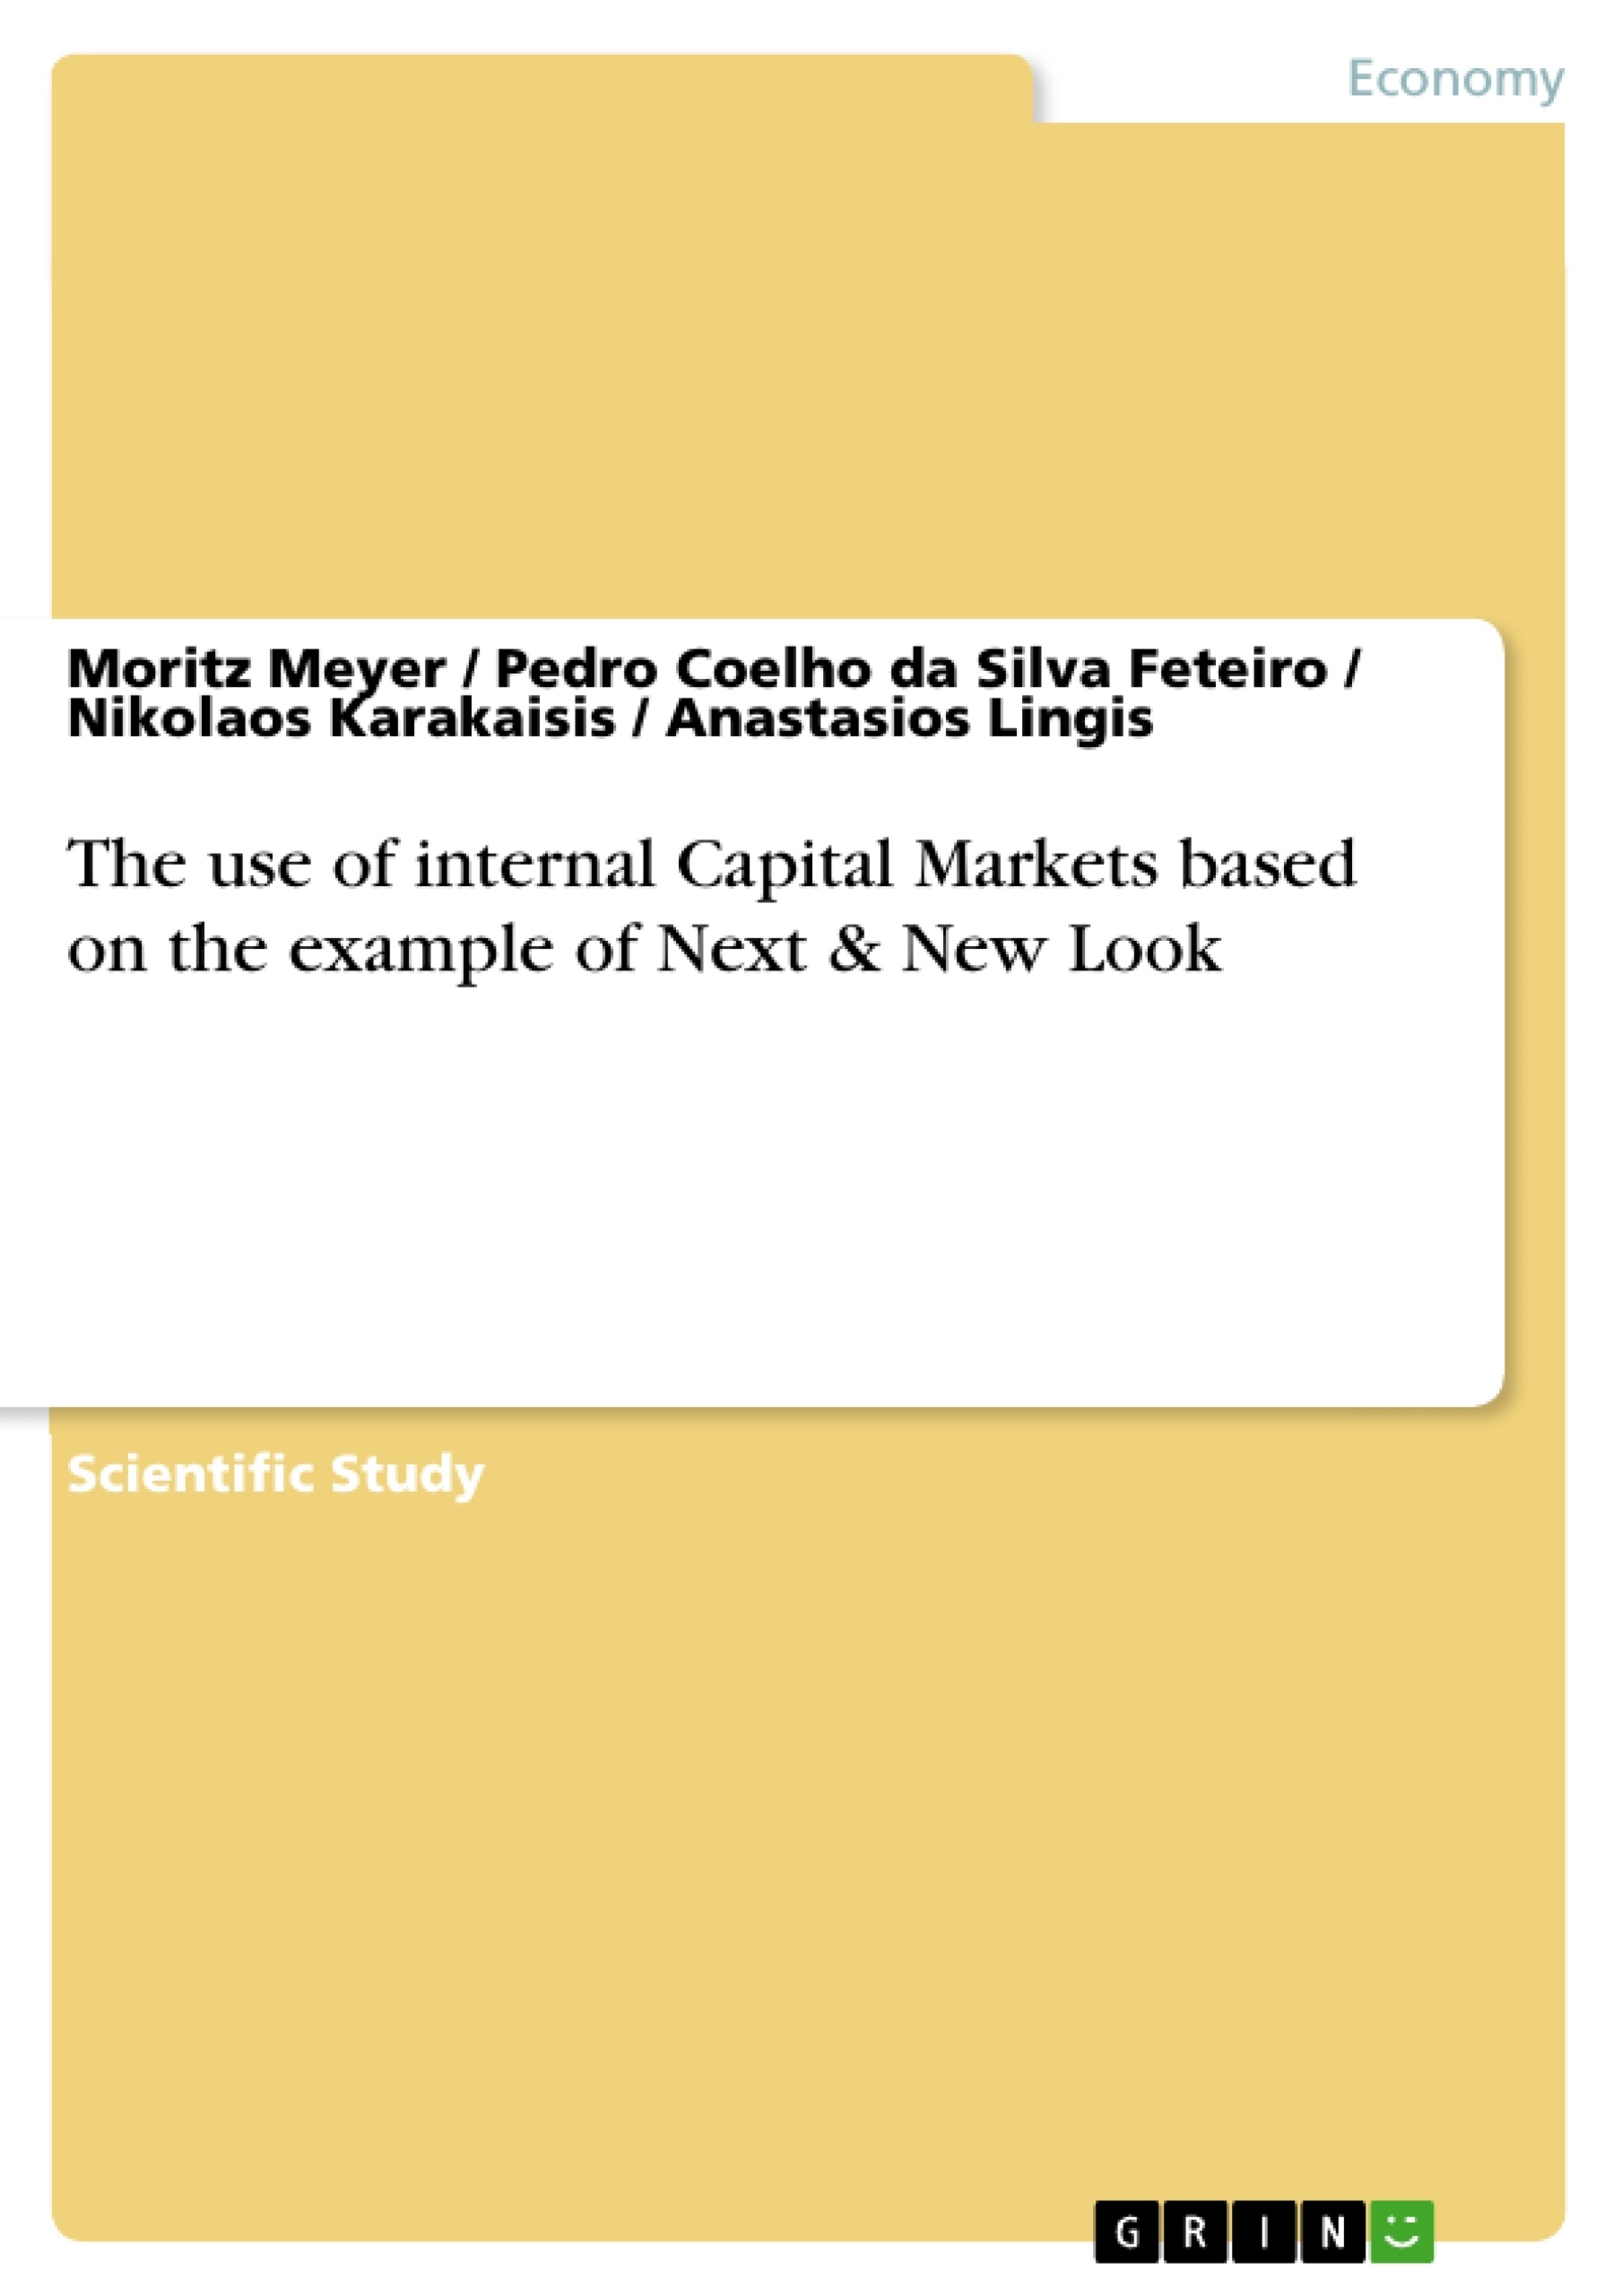 Titre: The use of internal Capital Markets based on the example of Next & New Look